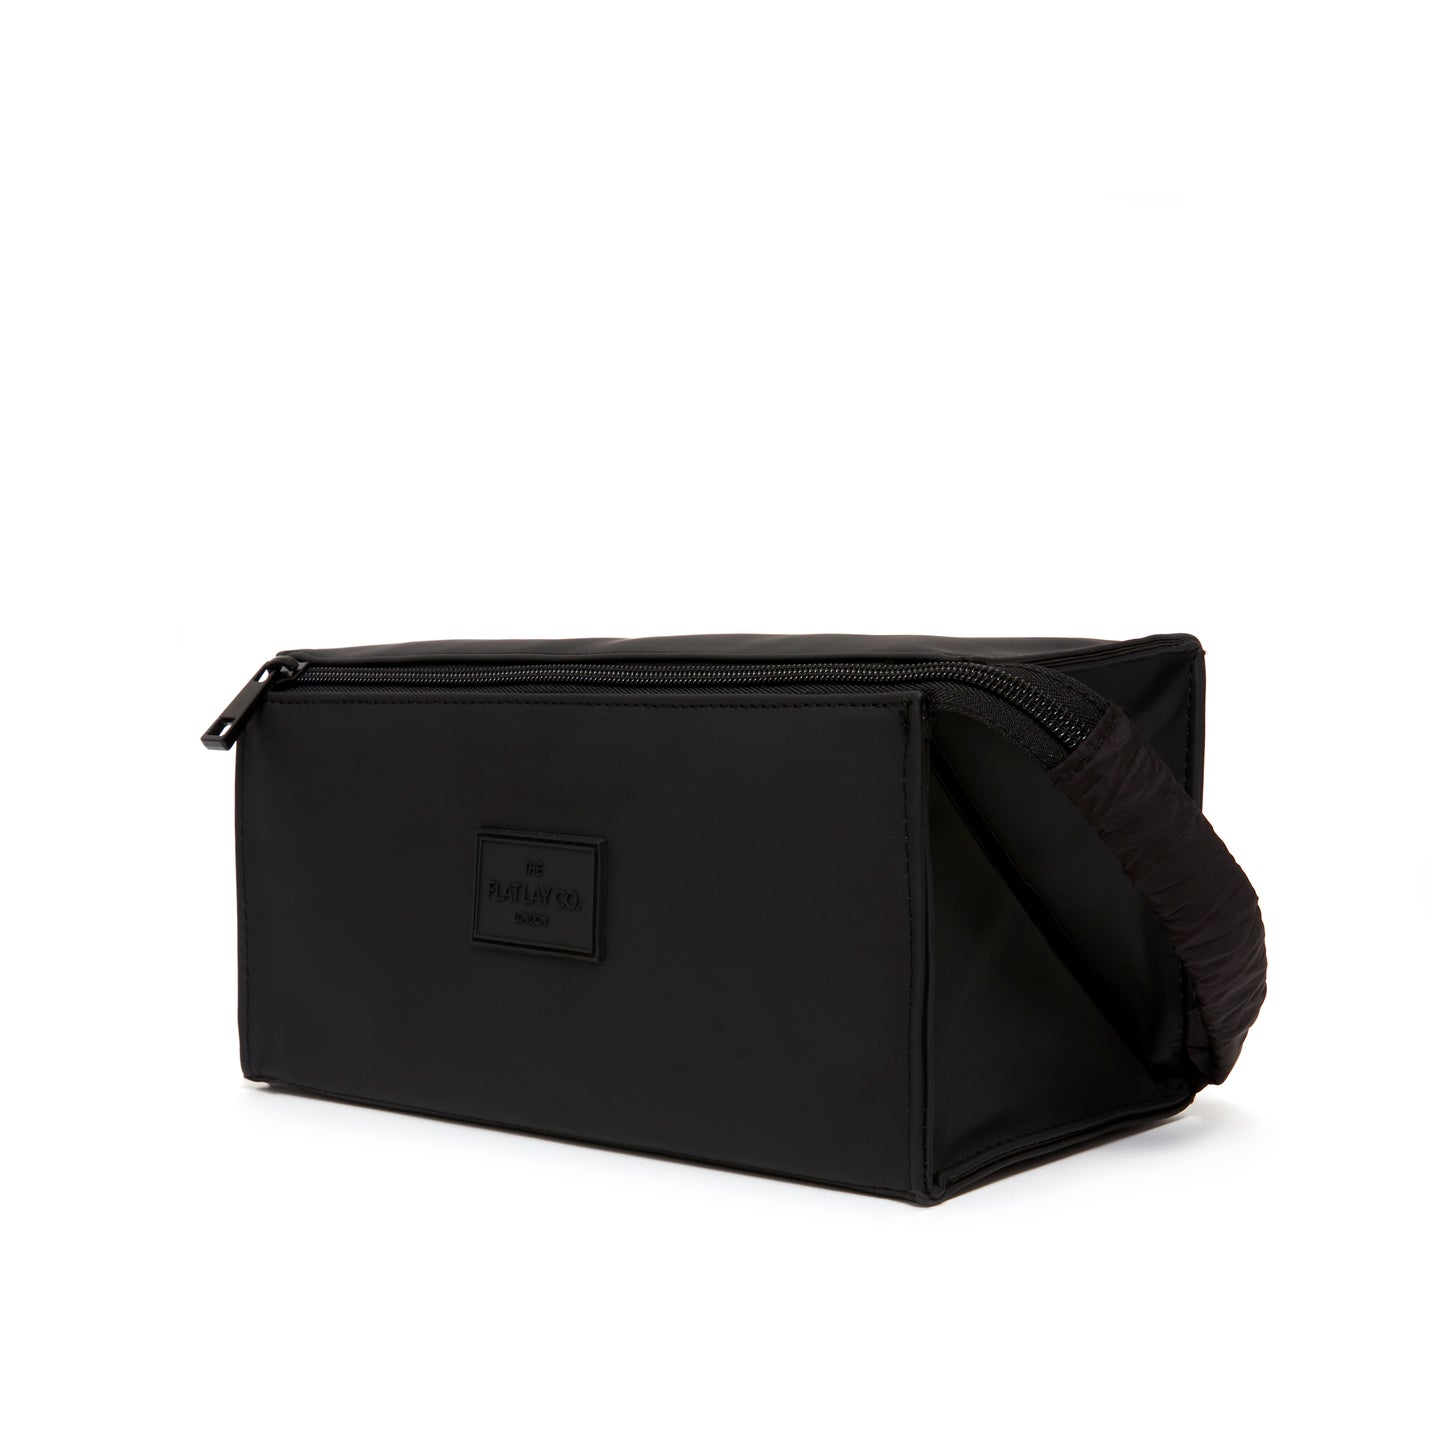 The Flat Lay Co. Unisex Box Bag in Black